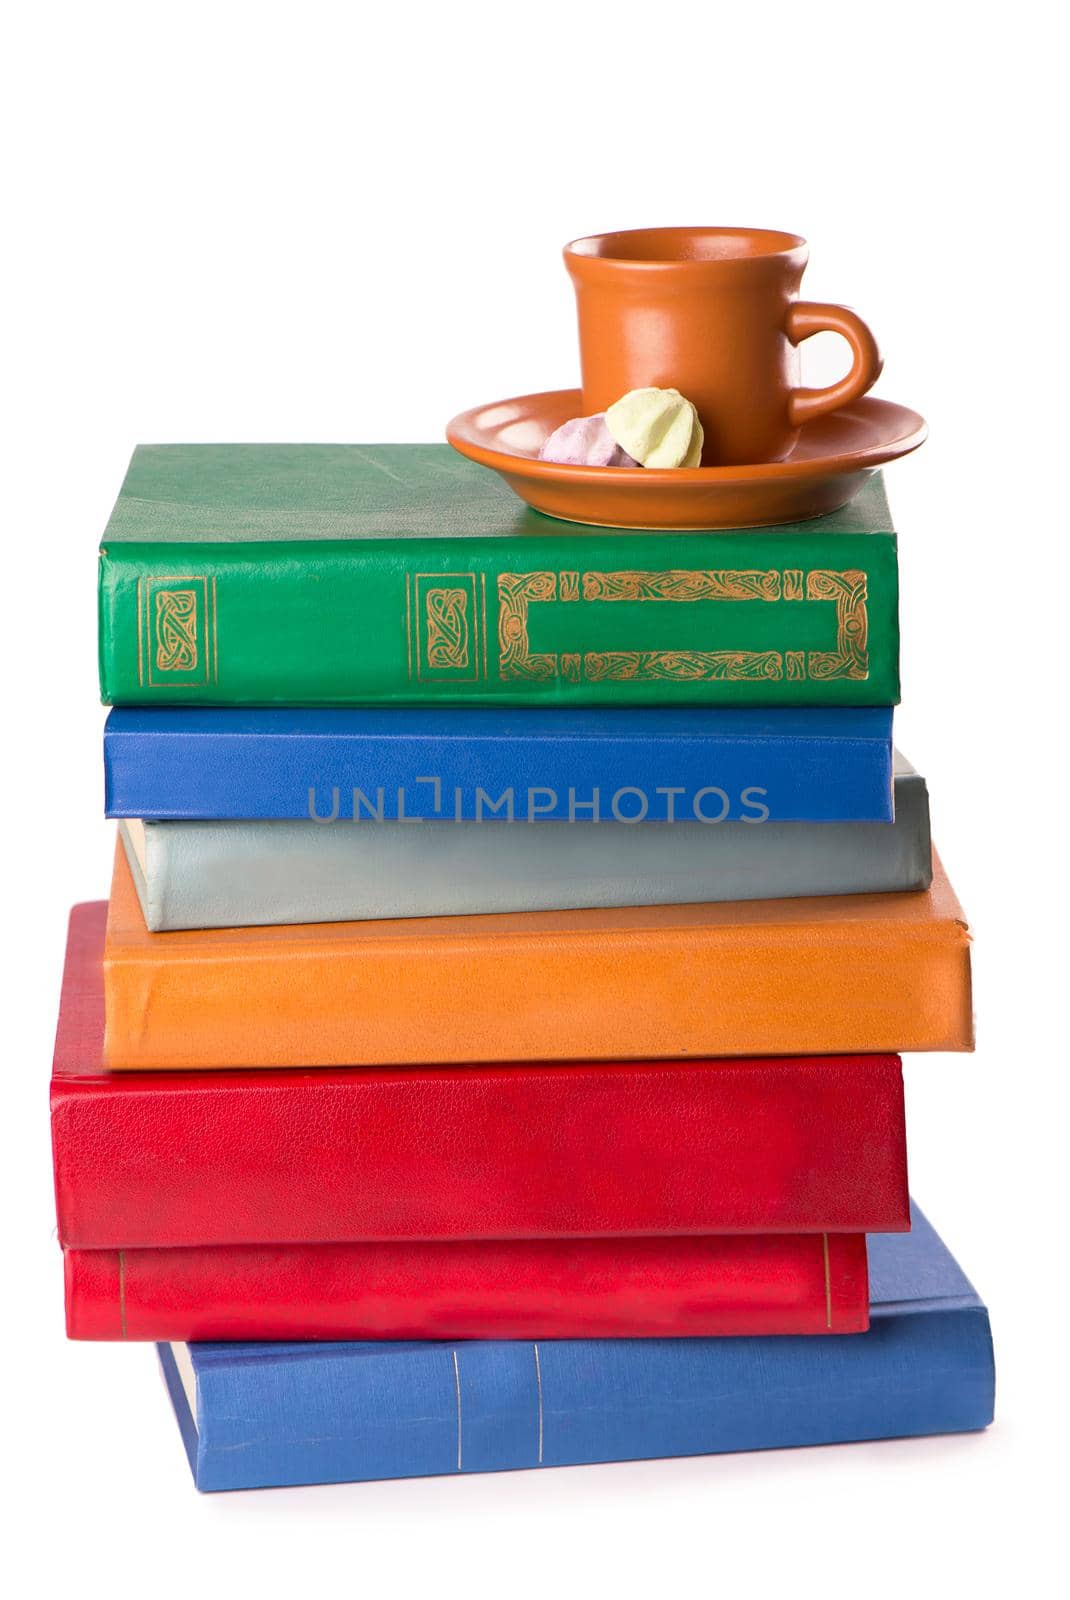 stack of Old books and a cup of coffee isolated on white by aprilphoto